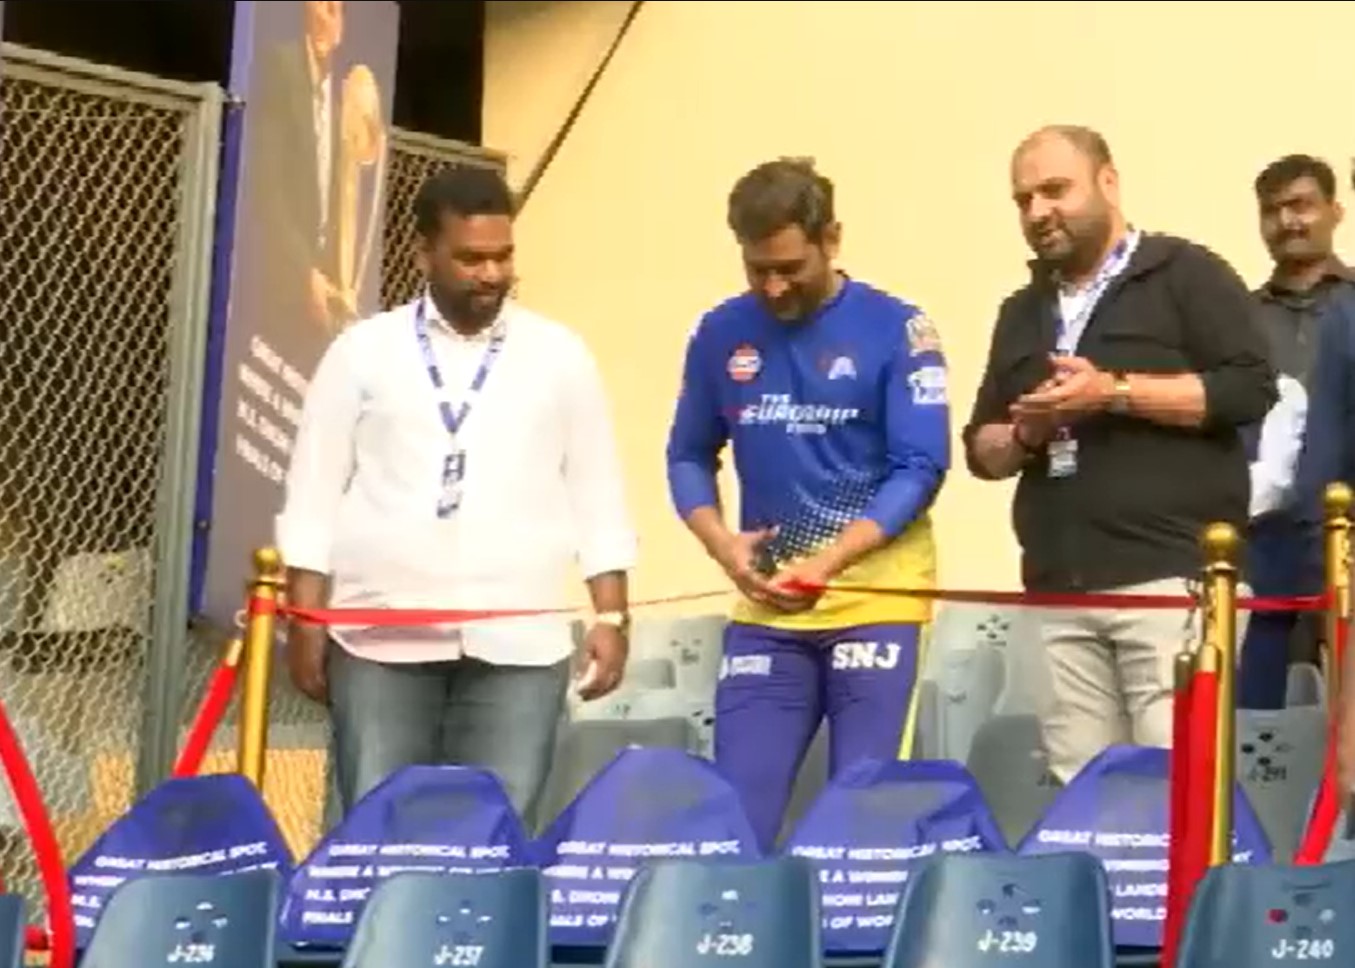 MS Dhoni: Watch MS Dhoni inaugurates 2011 WC victory memorial at Wankhede, New Memorial where MS Dhoni's six won India's World Cup, MS Dhoni World Cup